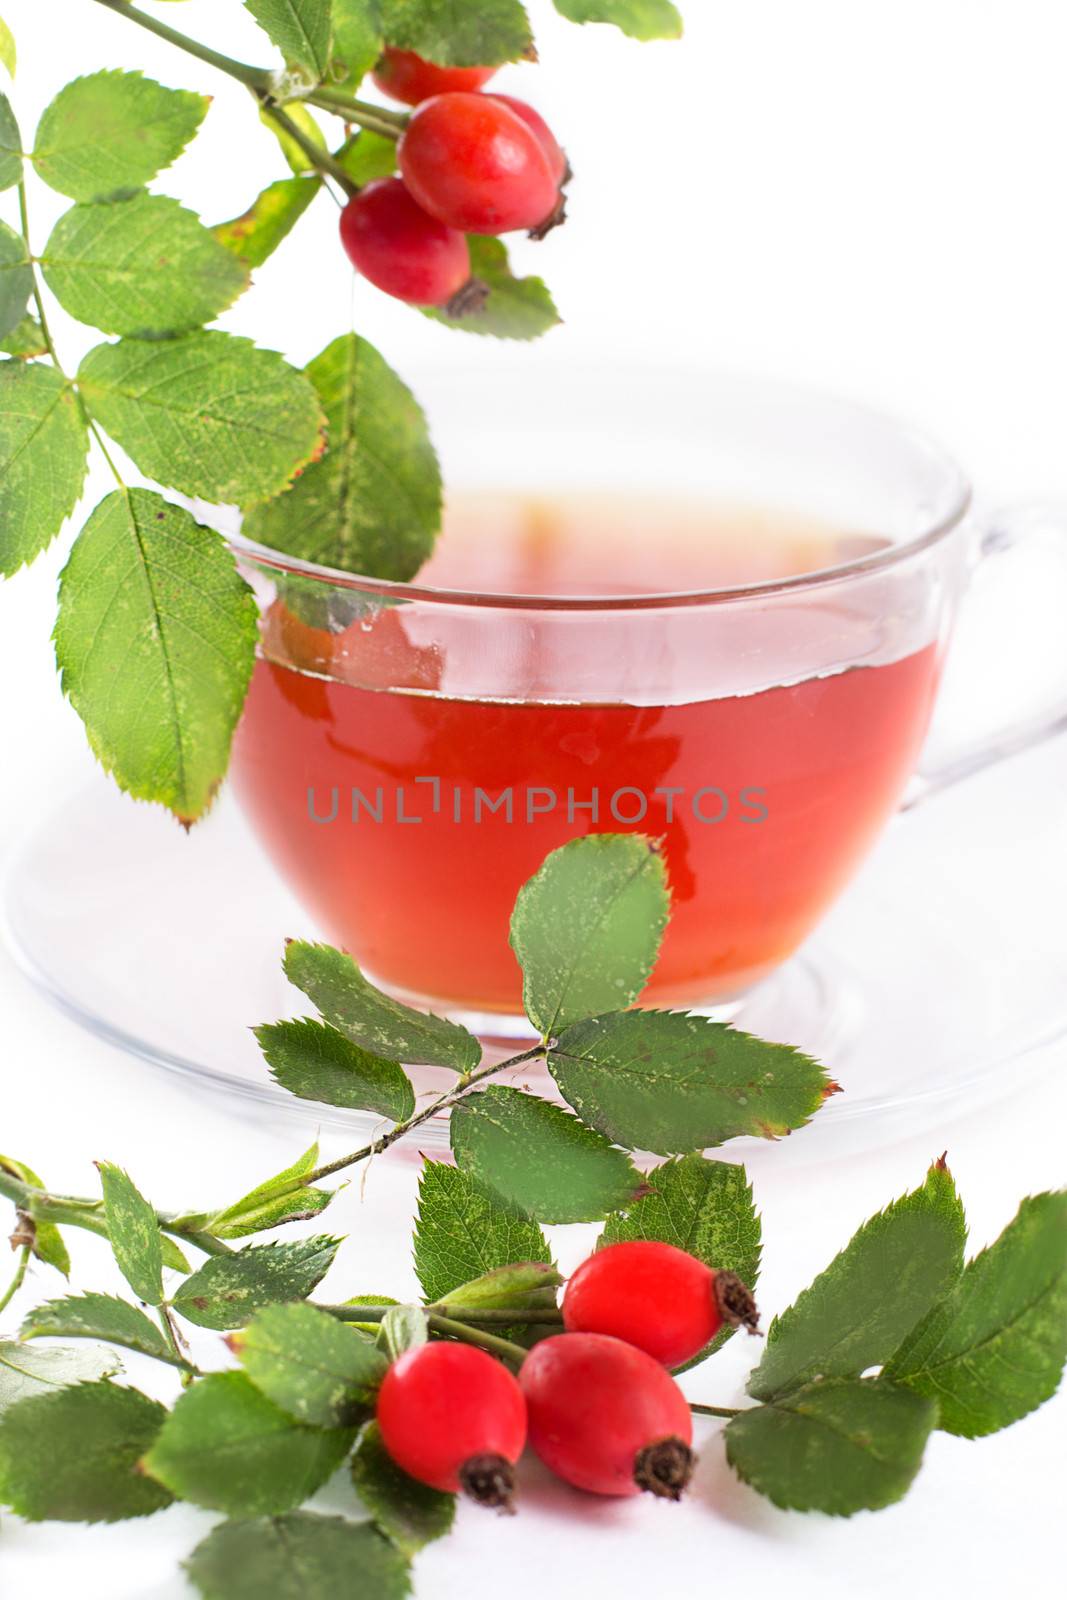 Cup of rose hip tea and berries by Angel_a